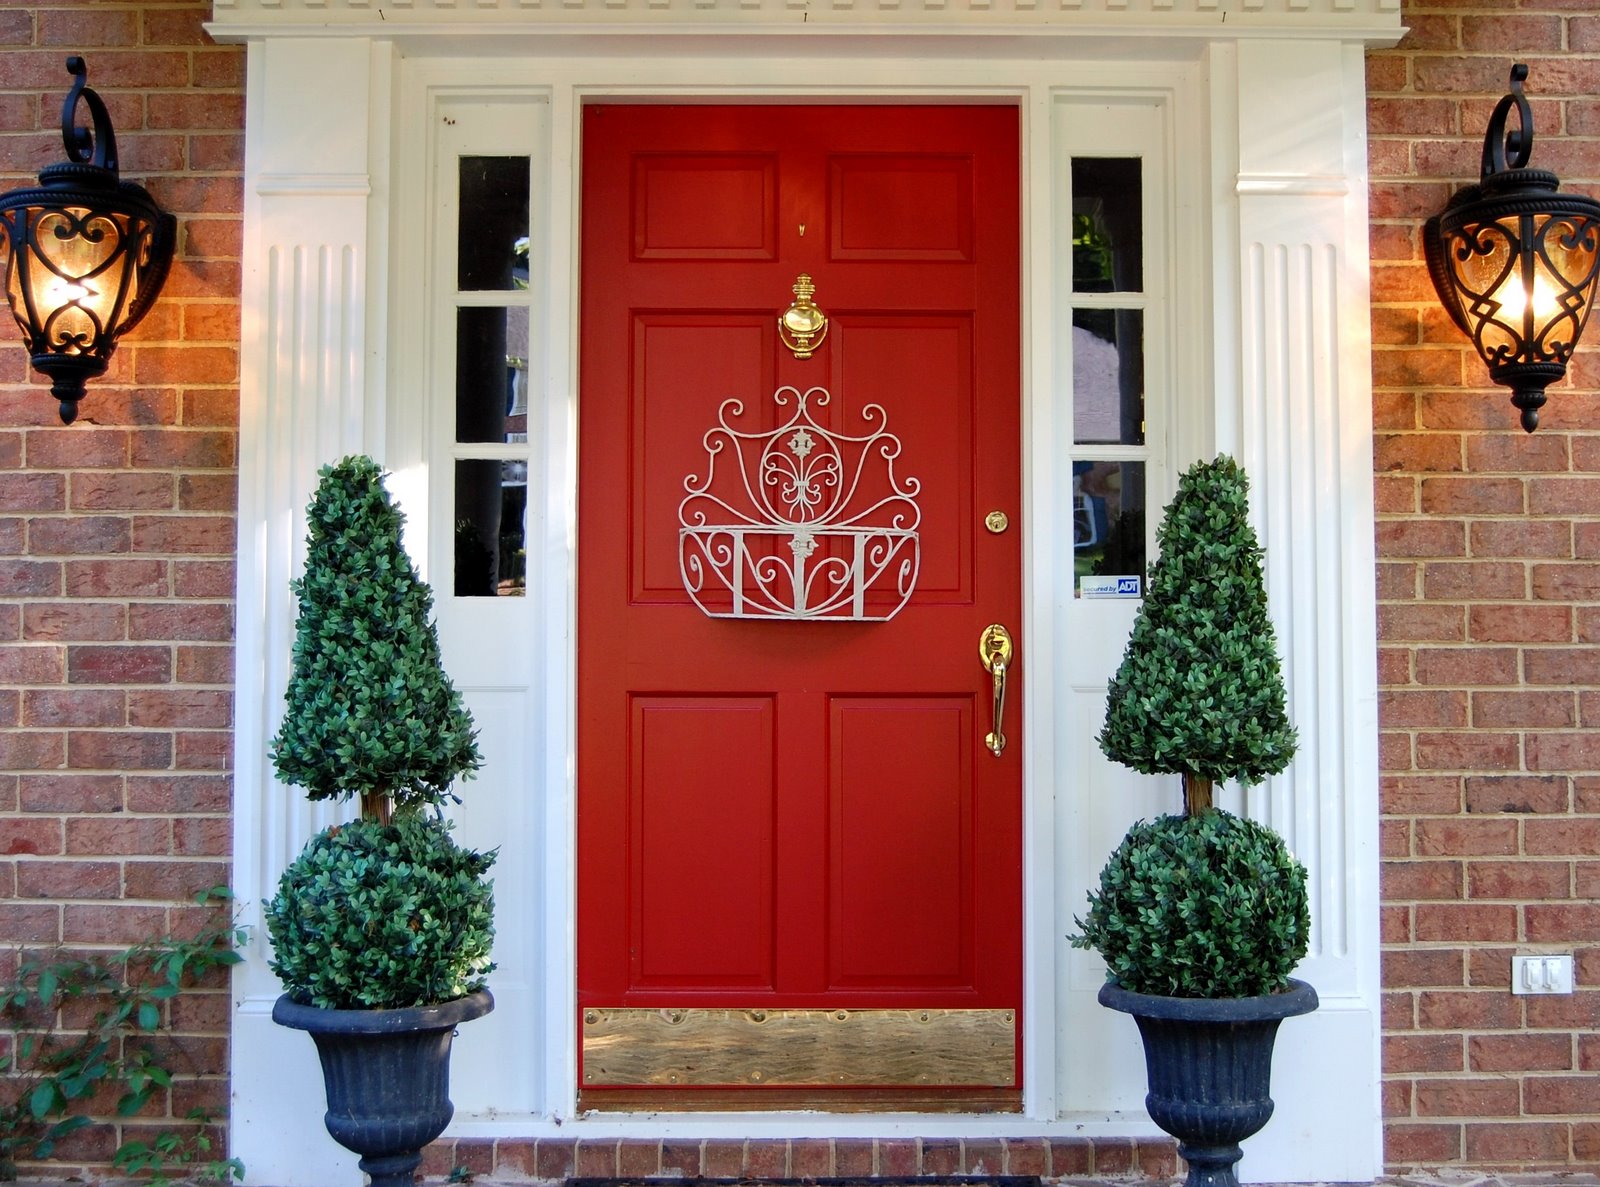 White Red Red Astonishing White Red Entrance With Red Front Door Ideas Applying Door Knocker Also Lever In Golden Color Furnished With Green Trees And Decor And Completed With Wall La Exterior Front Door Ideas: The “Face” Of The House